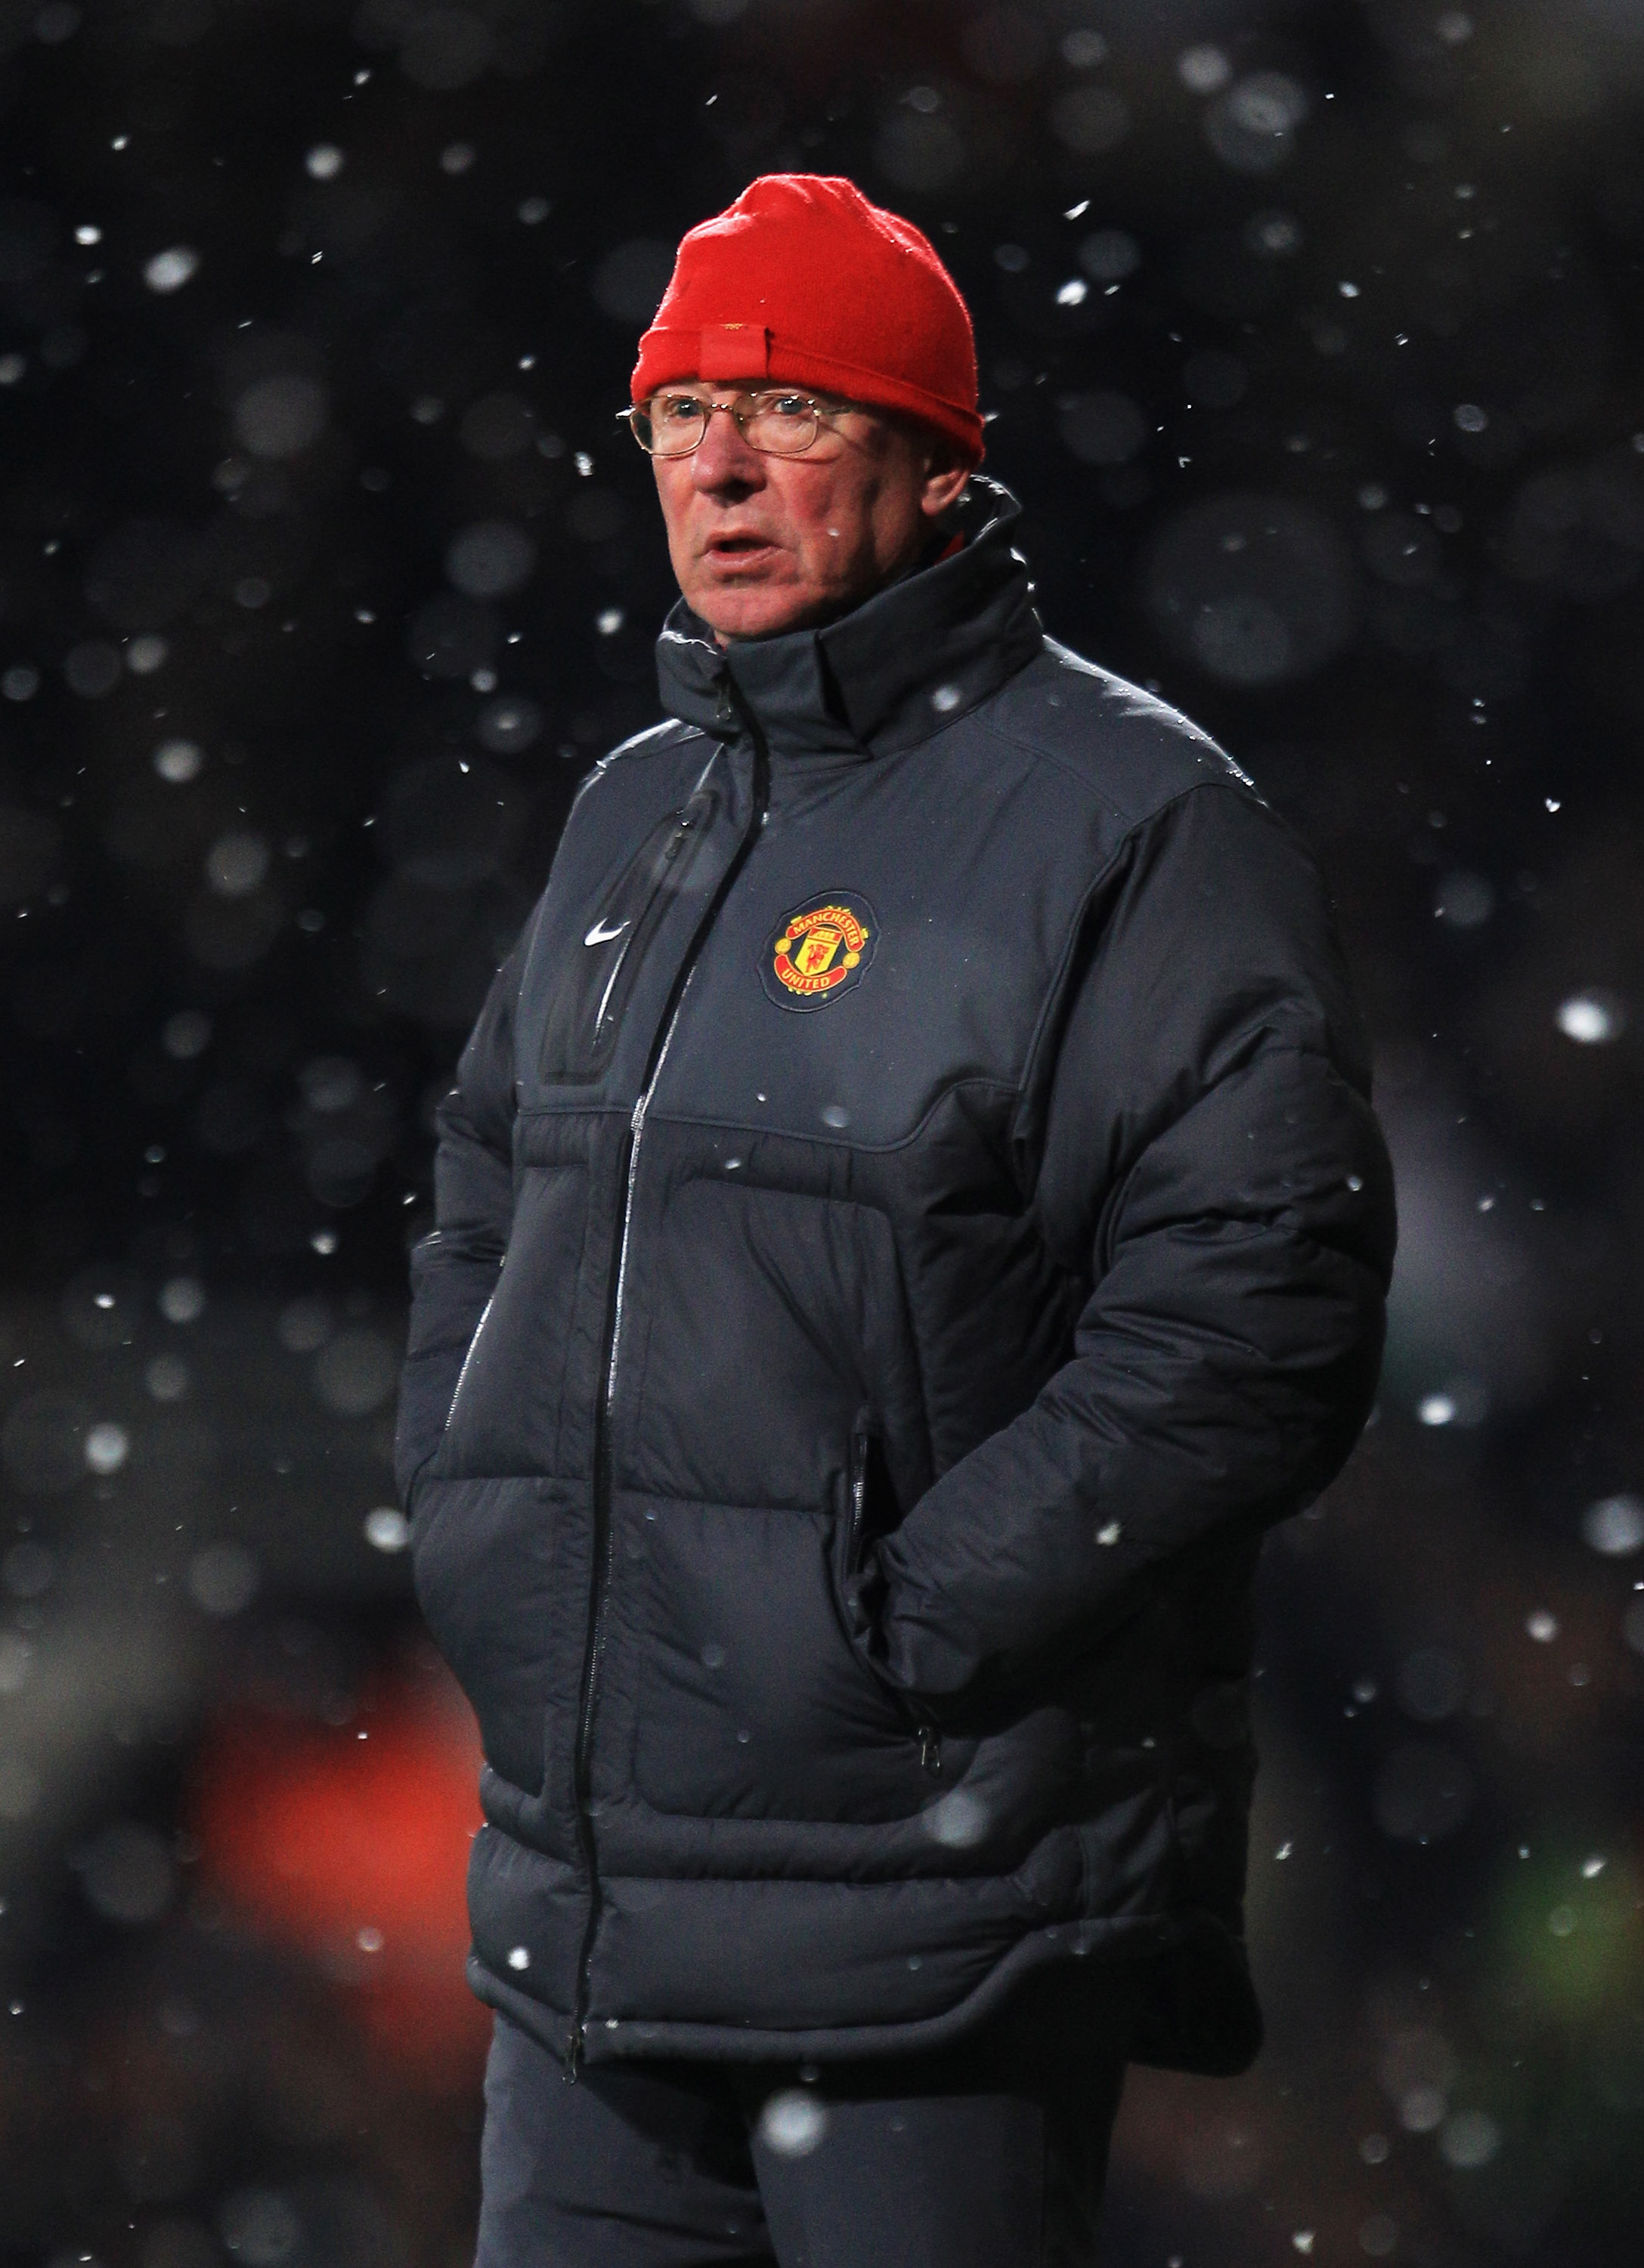 LONDON, ENGLAND - NOVEMBER 30:  Sir Alex Ferguson, manager of Manchester United looks on during the Carling Cup Quarter Final match between West Ham United and Manchester United at the Boleyn Ground on November 30, 2010 in London, England.  (Photo by Mark